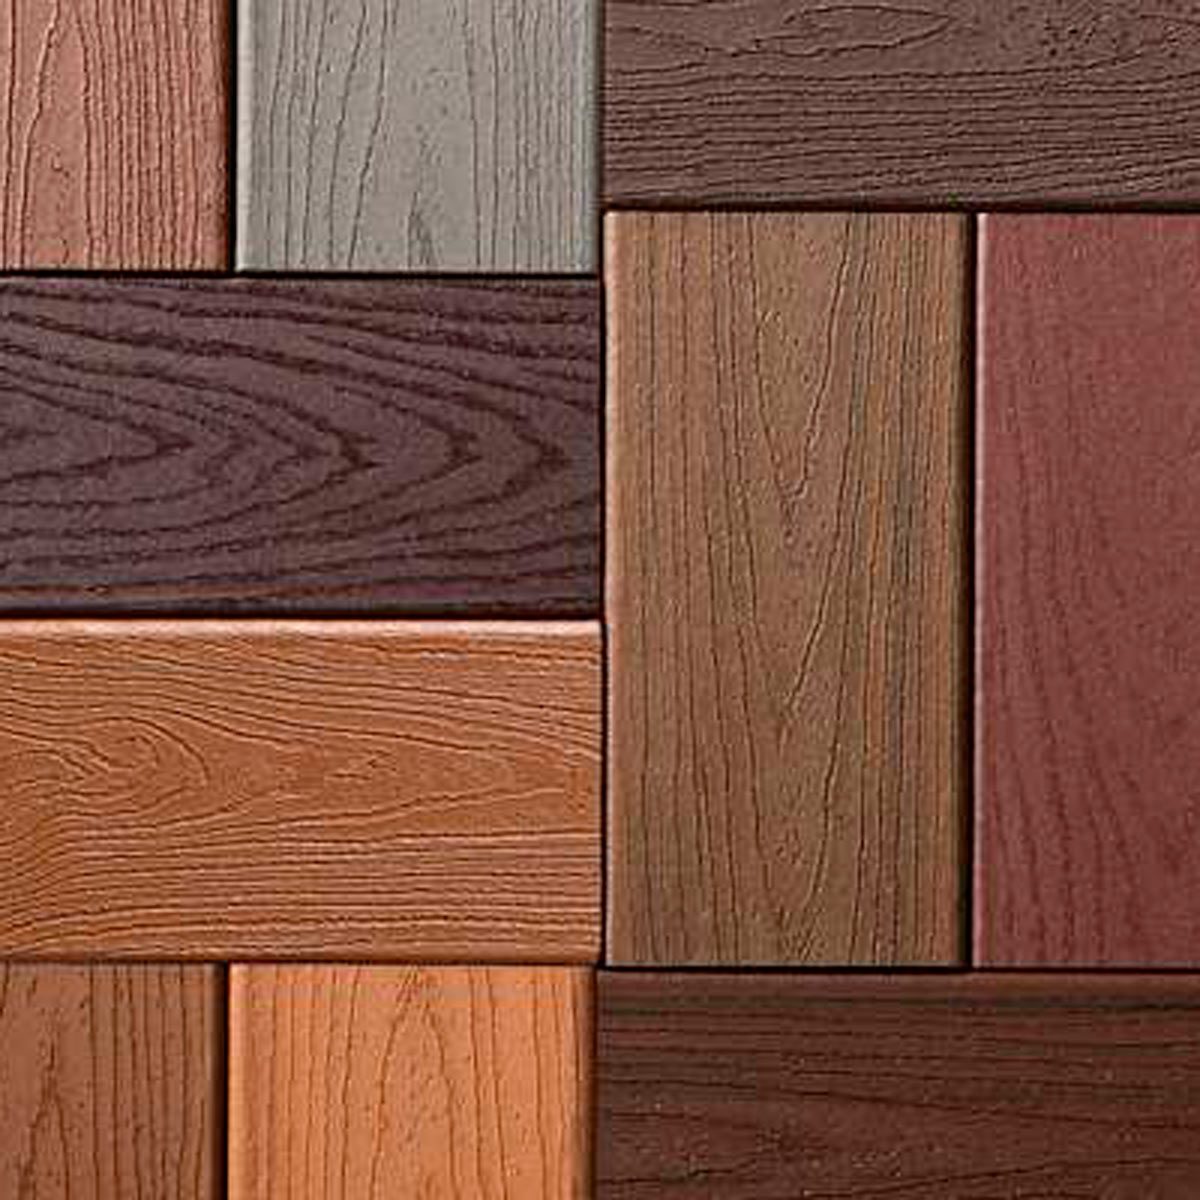 How To Select The Best Trex Decking Colors For Your Outdoor Space